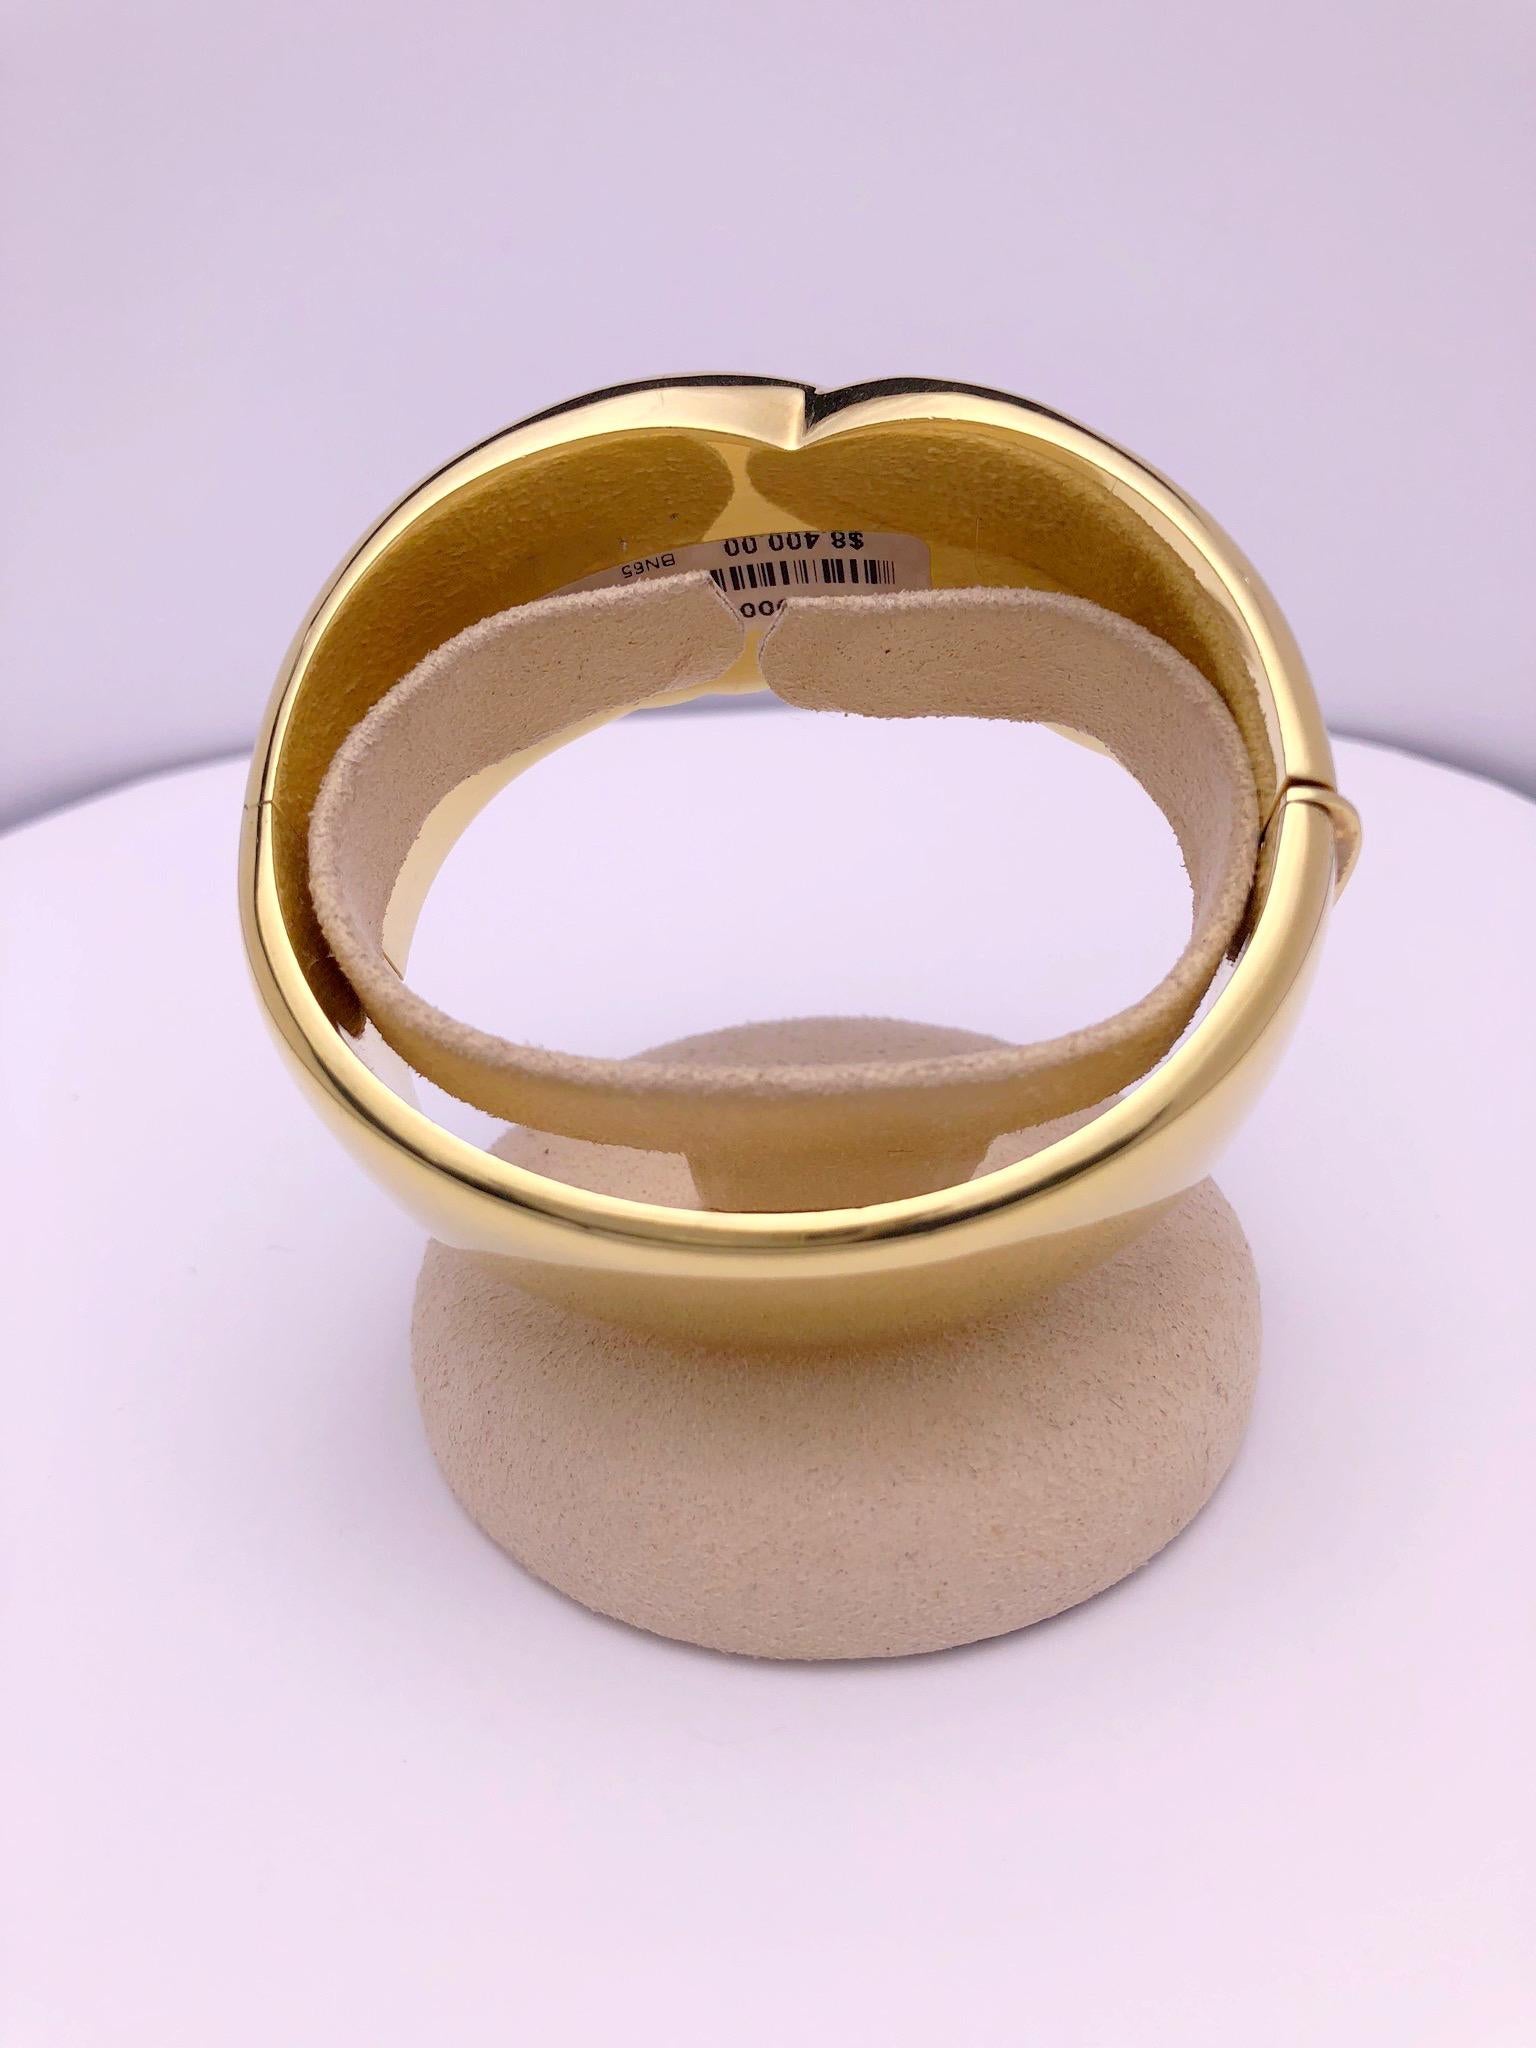 This is a beautiful high polished 18 KT yellow gold cuff bracelet. The front of the bracelet is designed with a large swirl pattern.
The bracelet measures 30.5 mm at the widest and tapers in the back to 23mm. The inside width is 58.9mm / 2.25